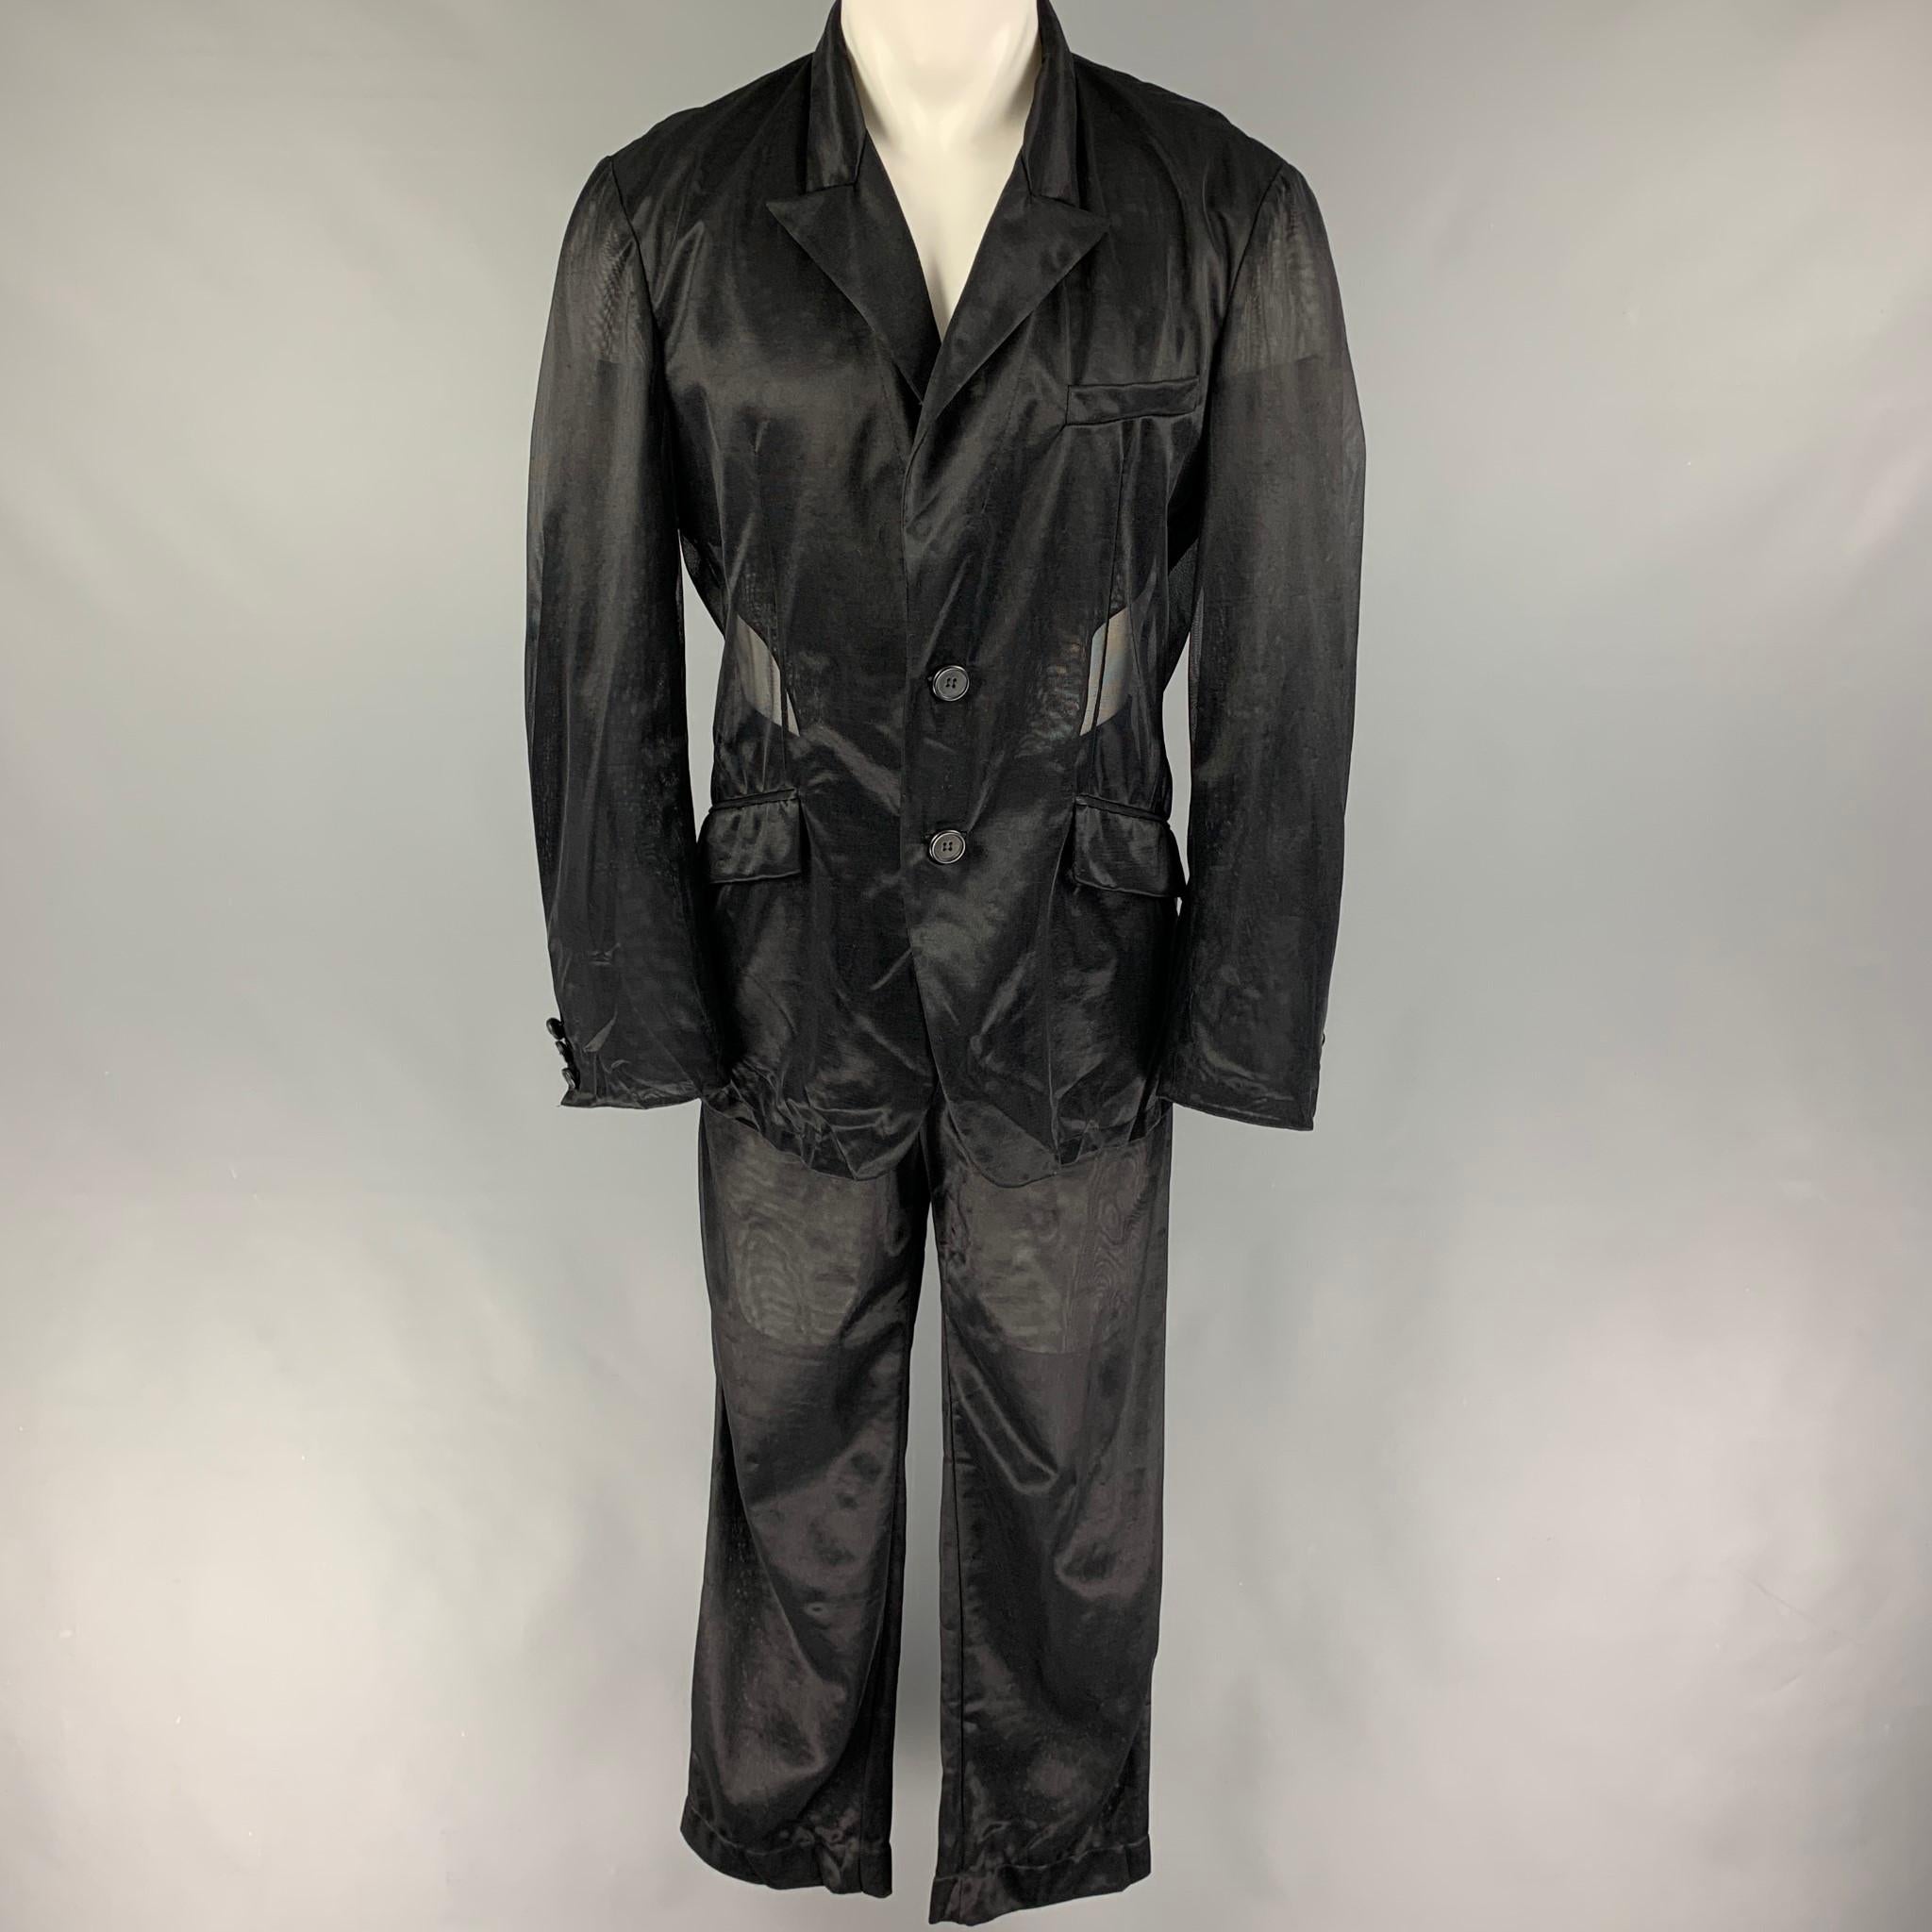 Vintage DOLCE & GABBANA suit comes in black see-through polyamide and includes a single breasted, double button sport coat with a peak lapel and matching flat front trousers. Made in Italy.

Good Pre-Owned Condition.
Marked: